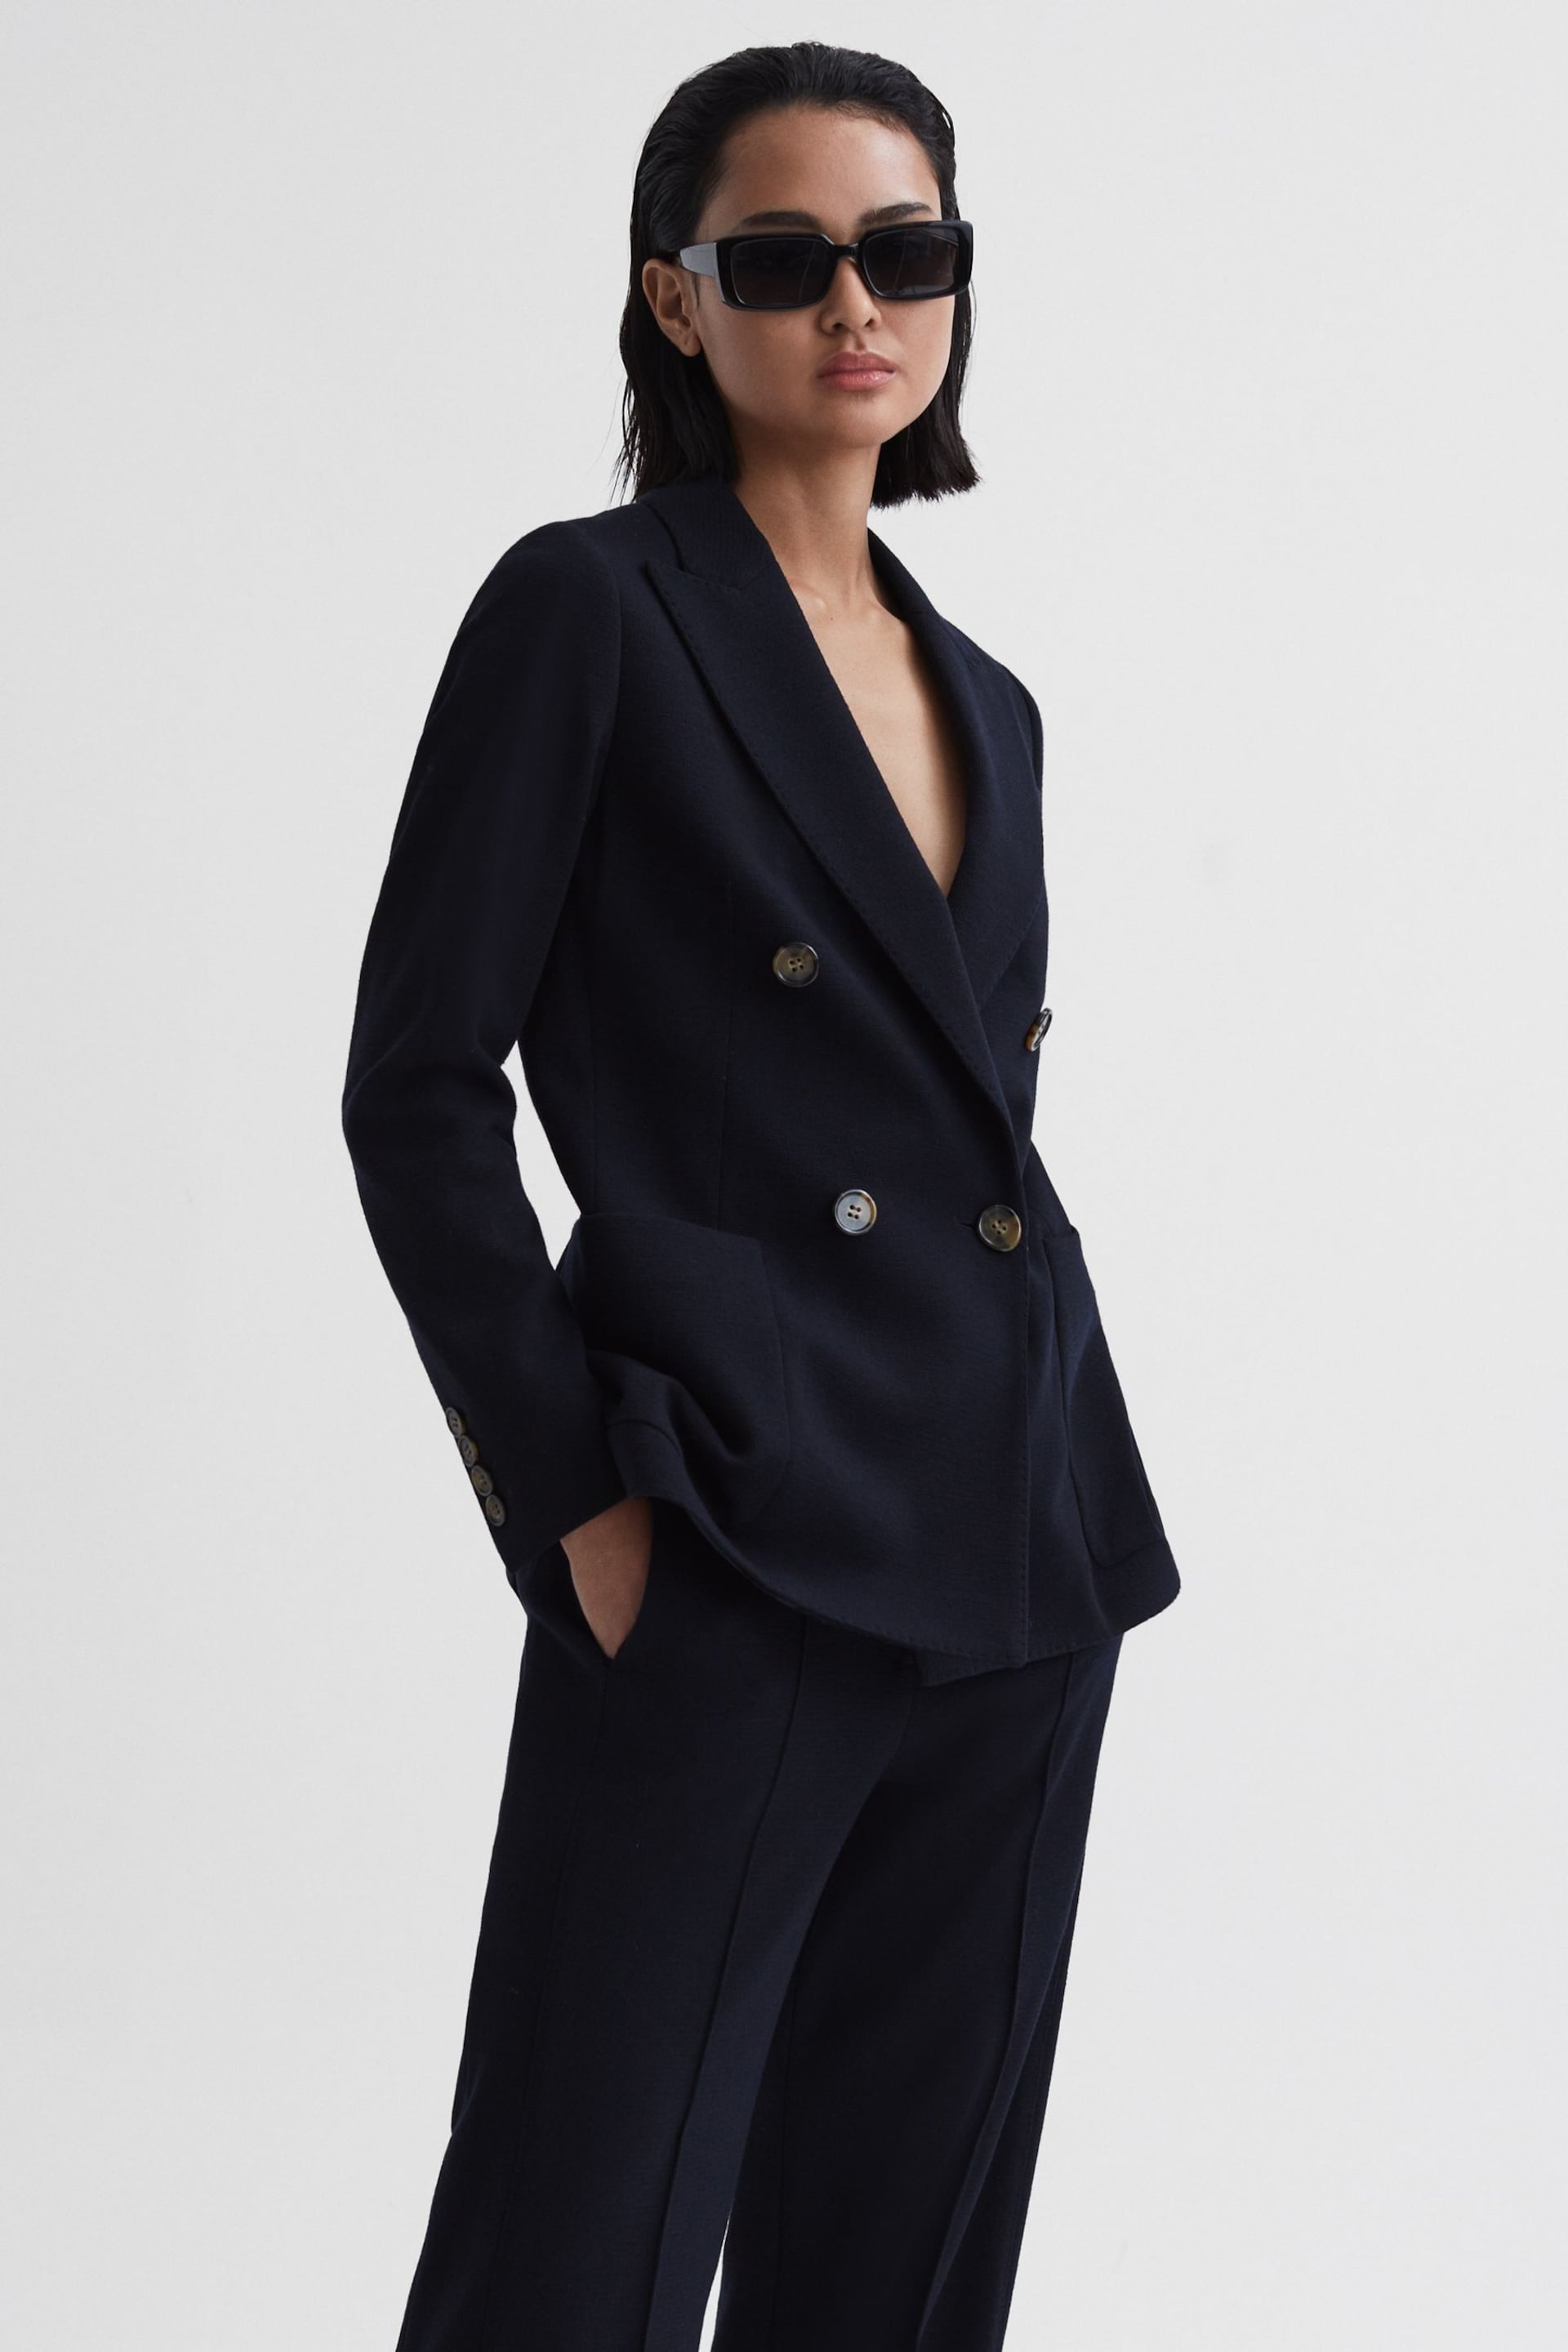 Reiss Navy Iria Double Breasted Wool Blend Suit Blazer - Image 1 of 5